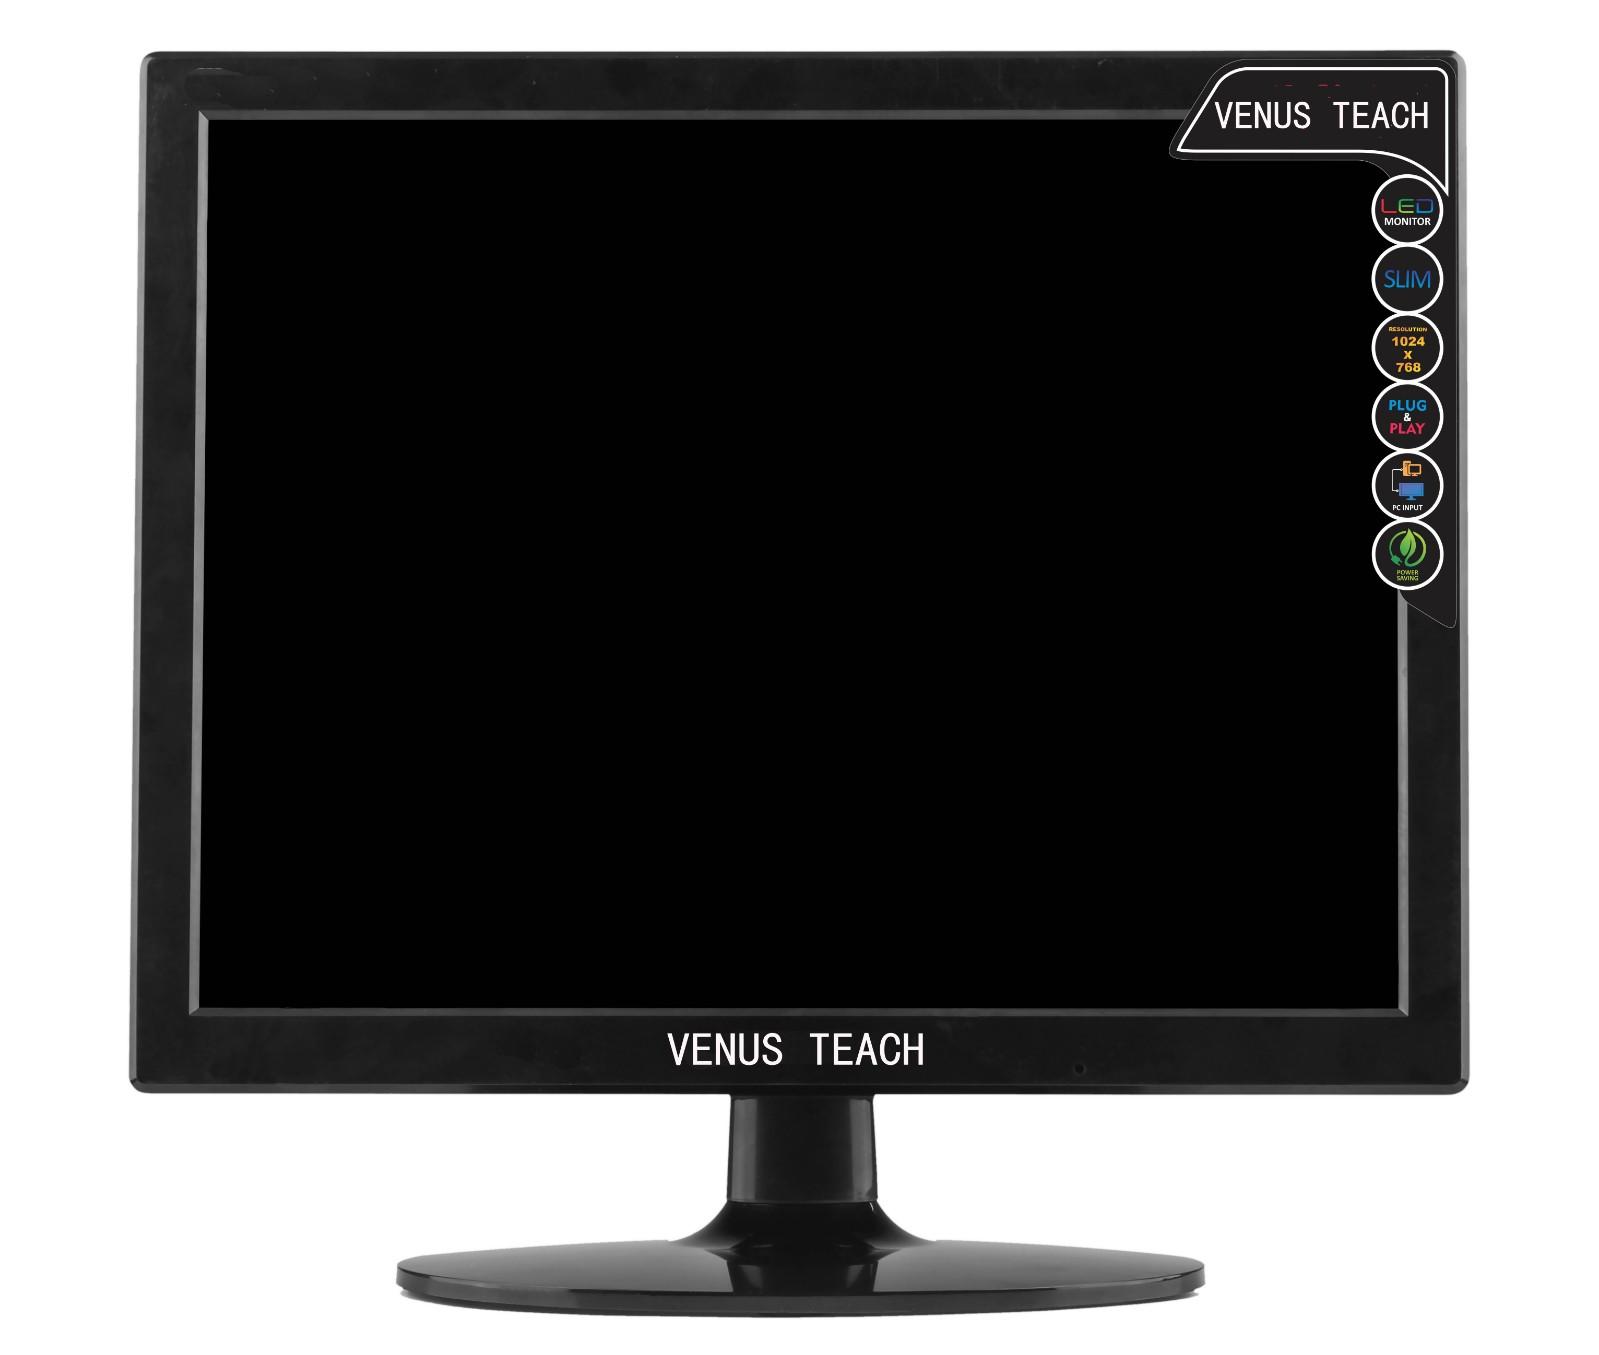 professional design15 lcd monitor with hdmi output for lcd tv screen